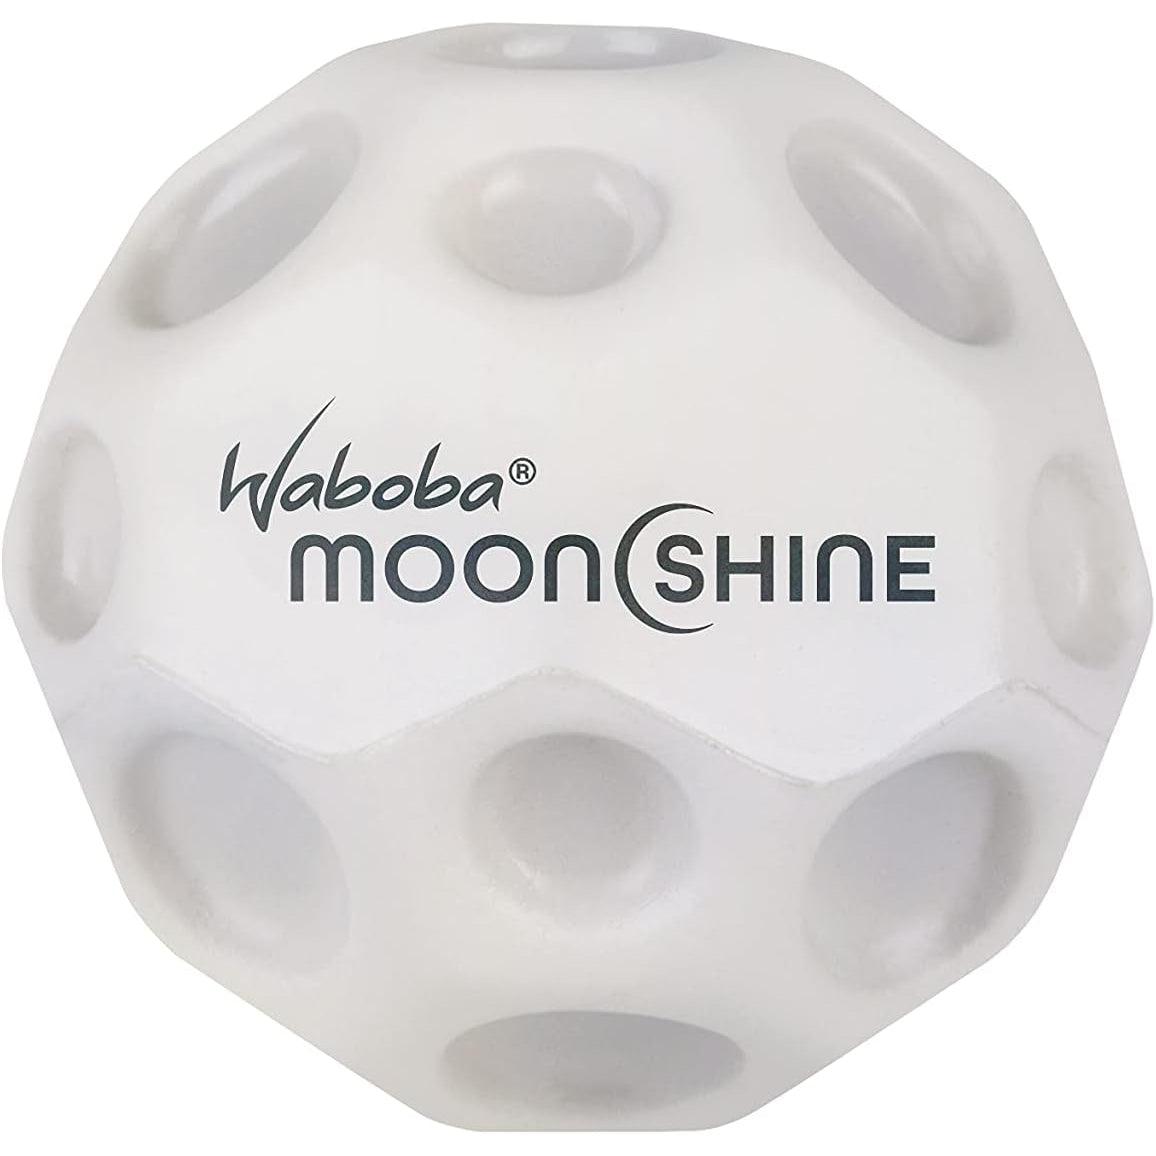 Front view of Moonshine Ball.